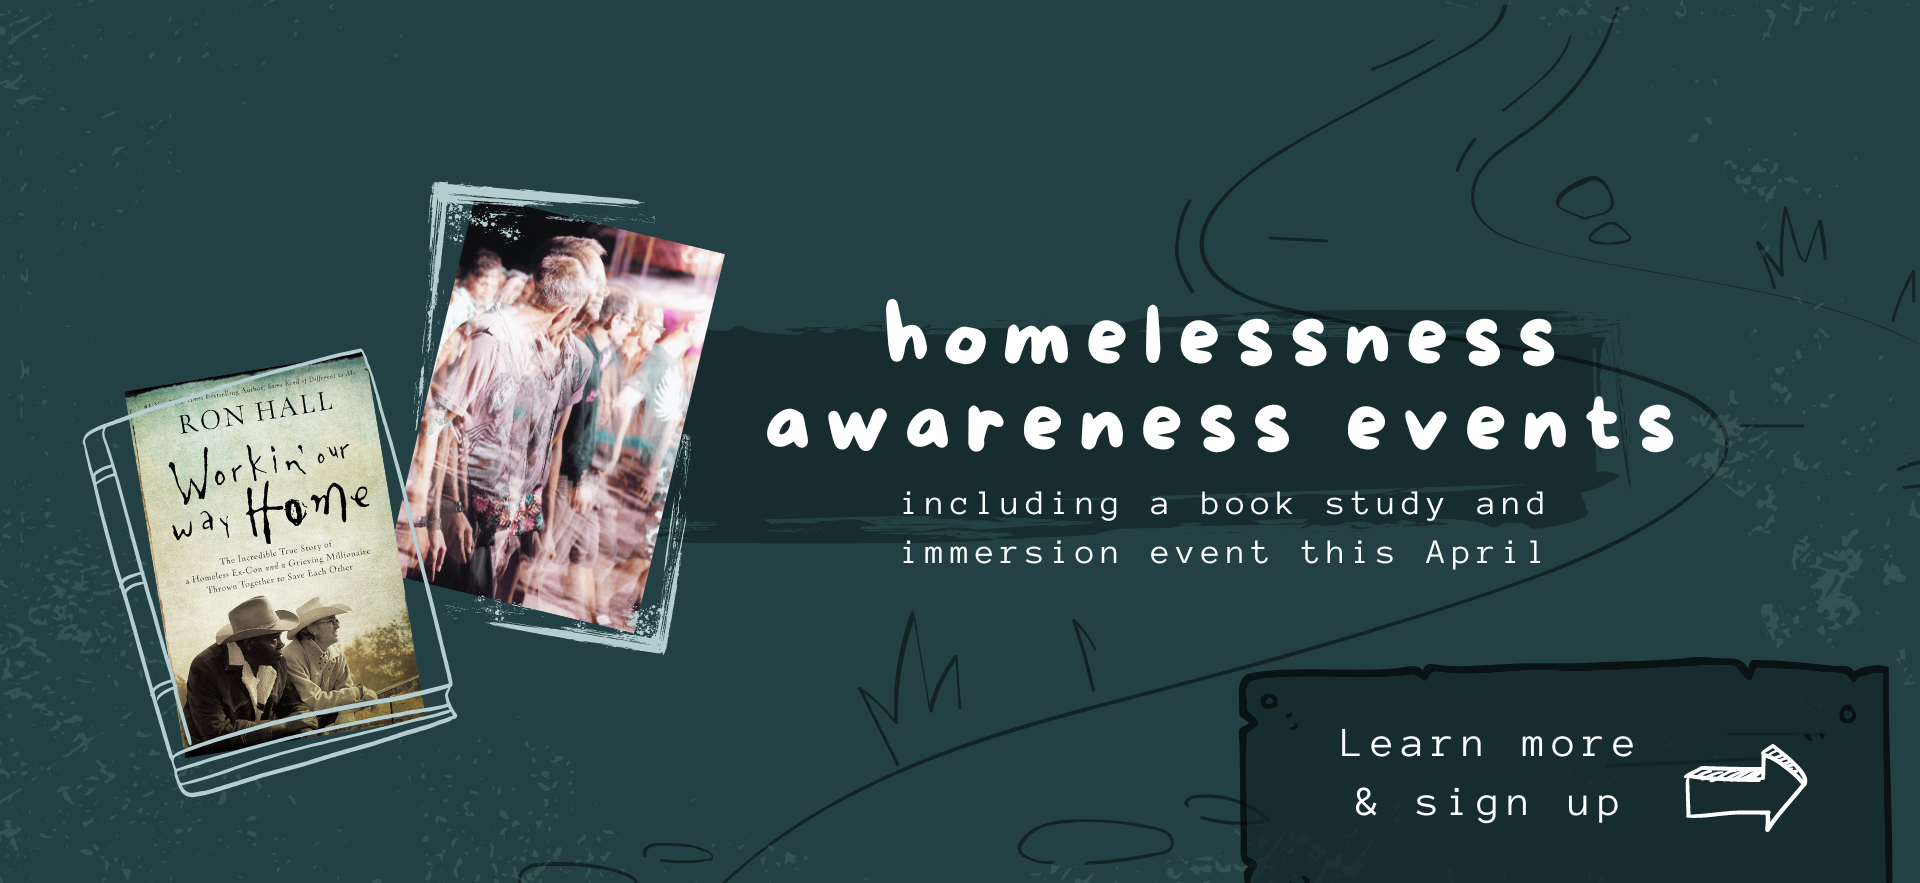 homelessness immersion event 1920x1080 (1920 x 883 px).png